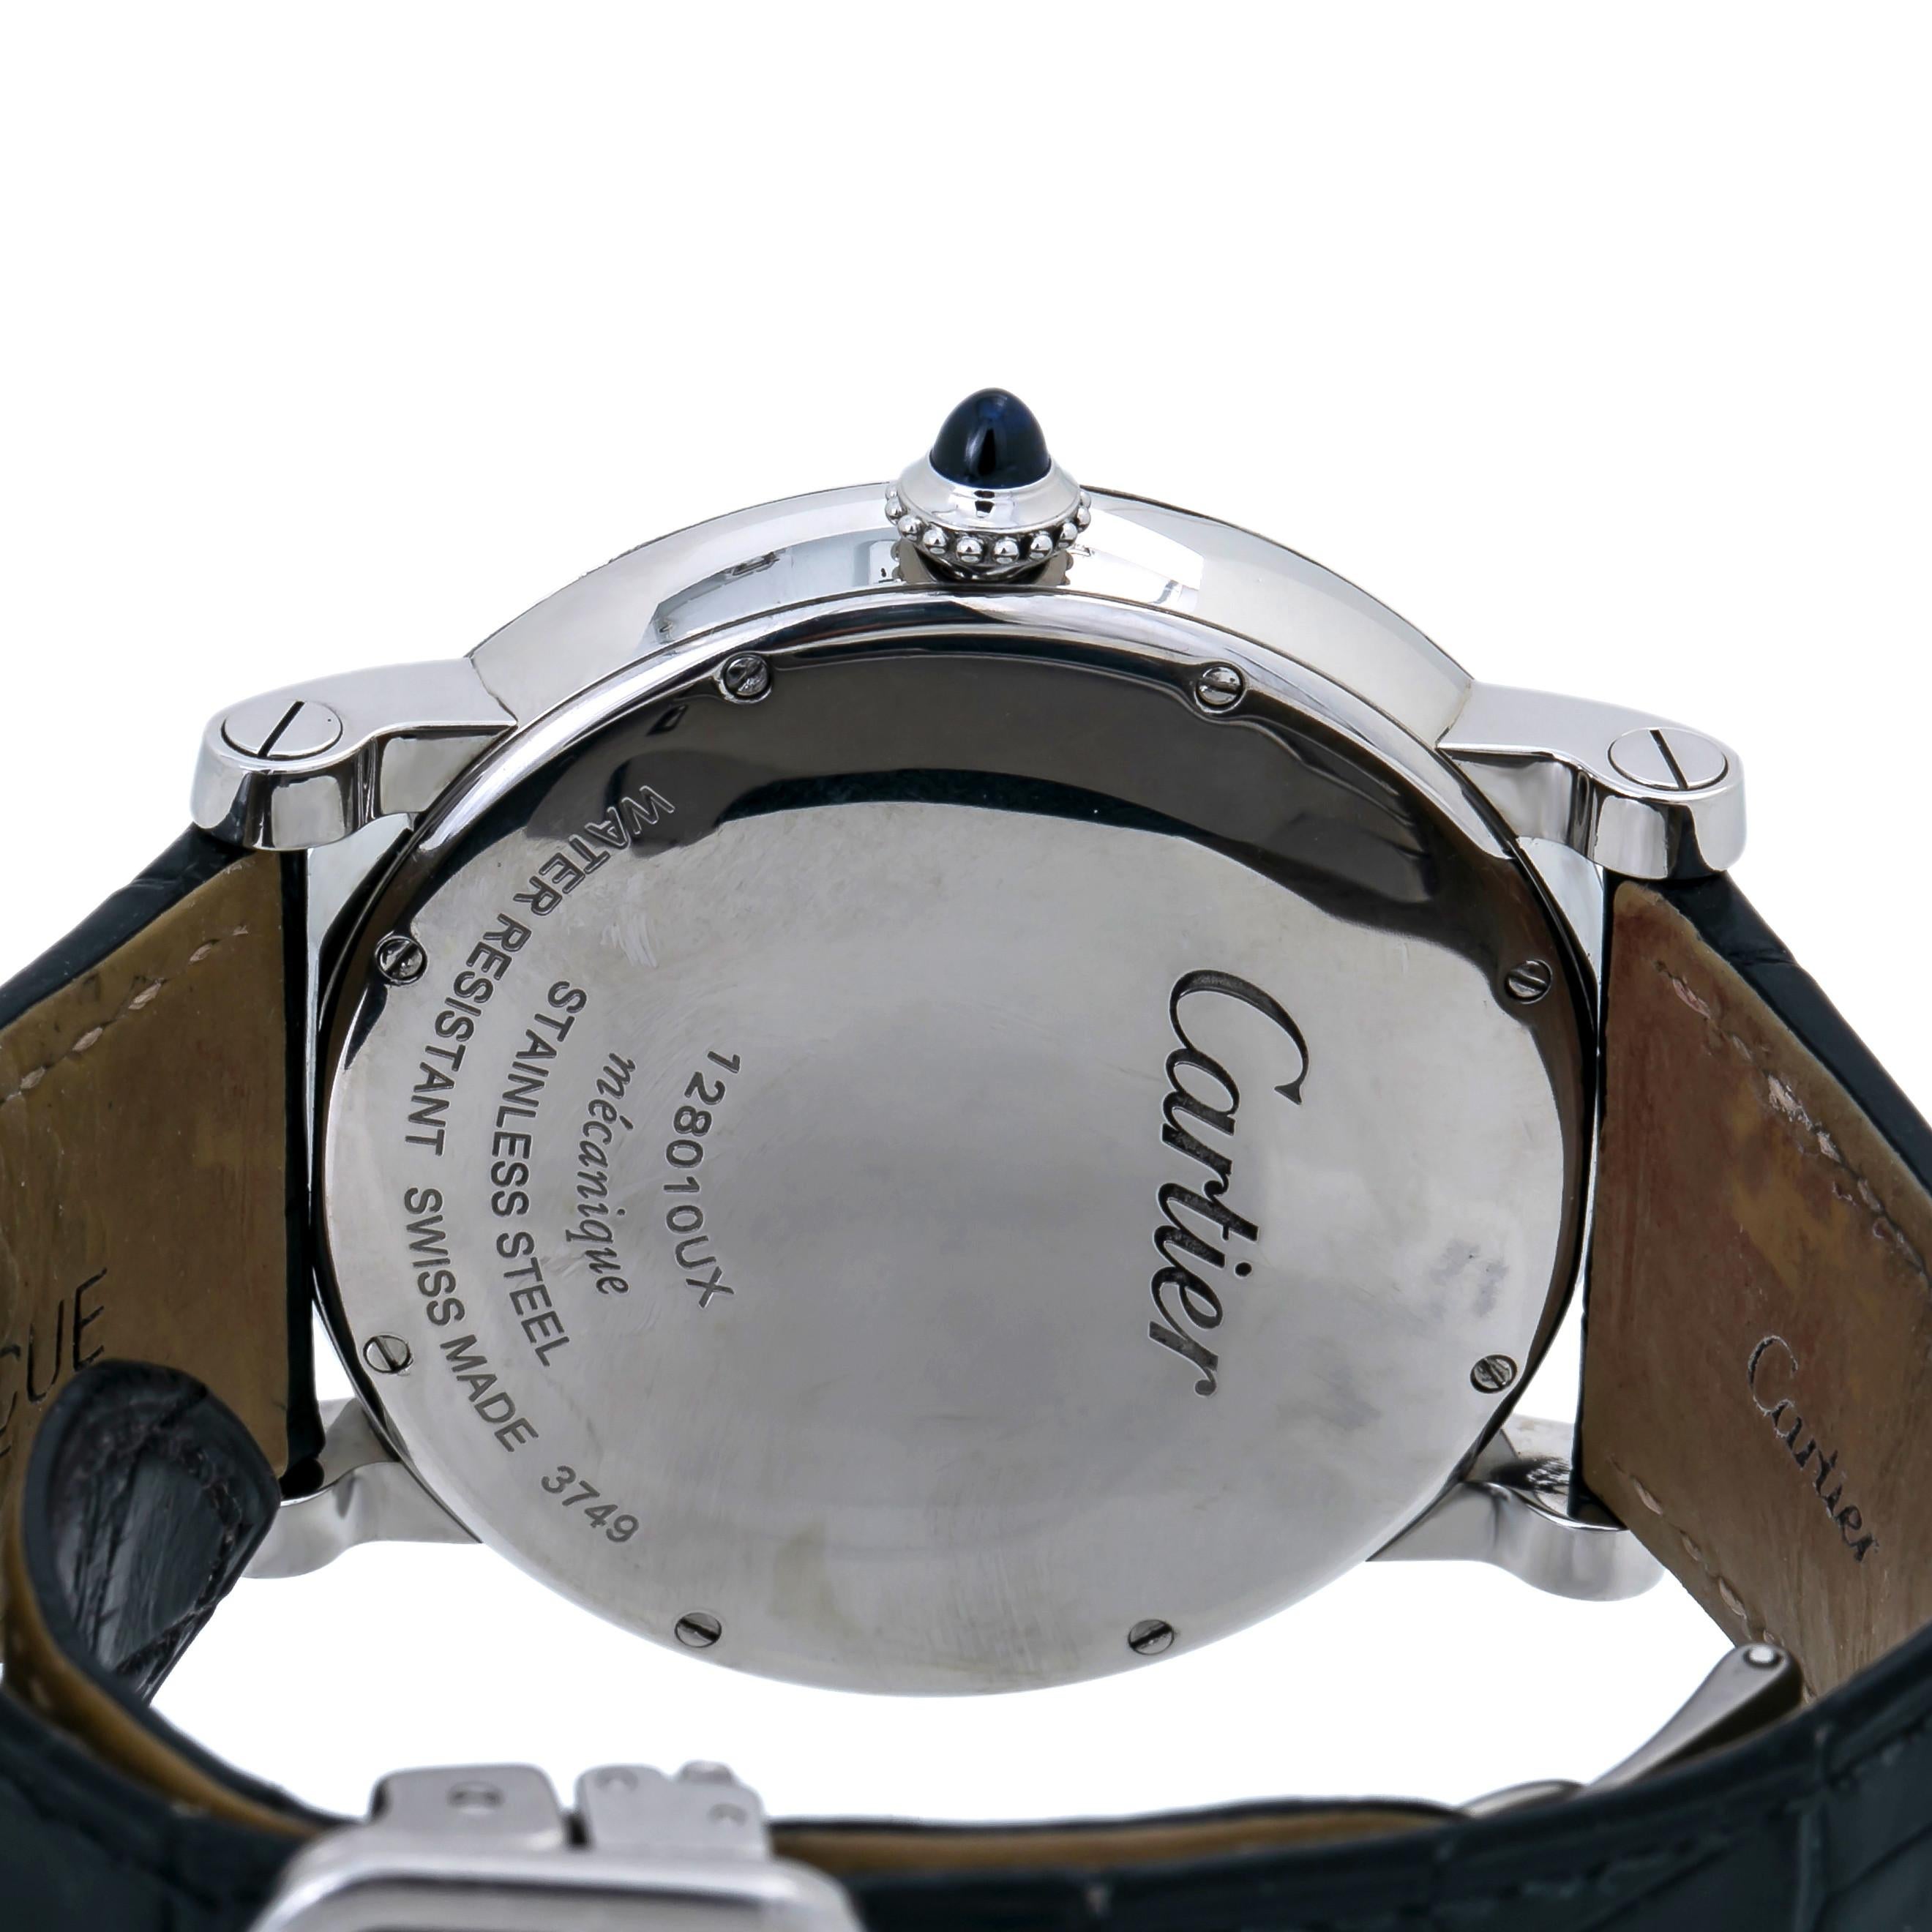 Cartier Rotonde W1556369 Manual Wind Stainless Leather Men's Watch In Excellent Condition For Sale In Miami, FL